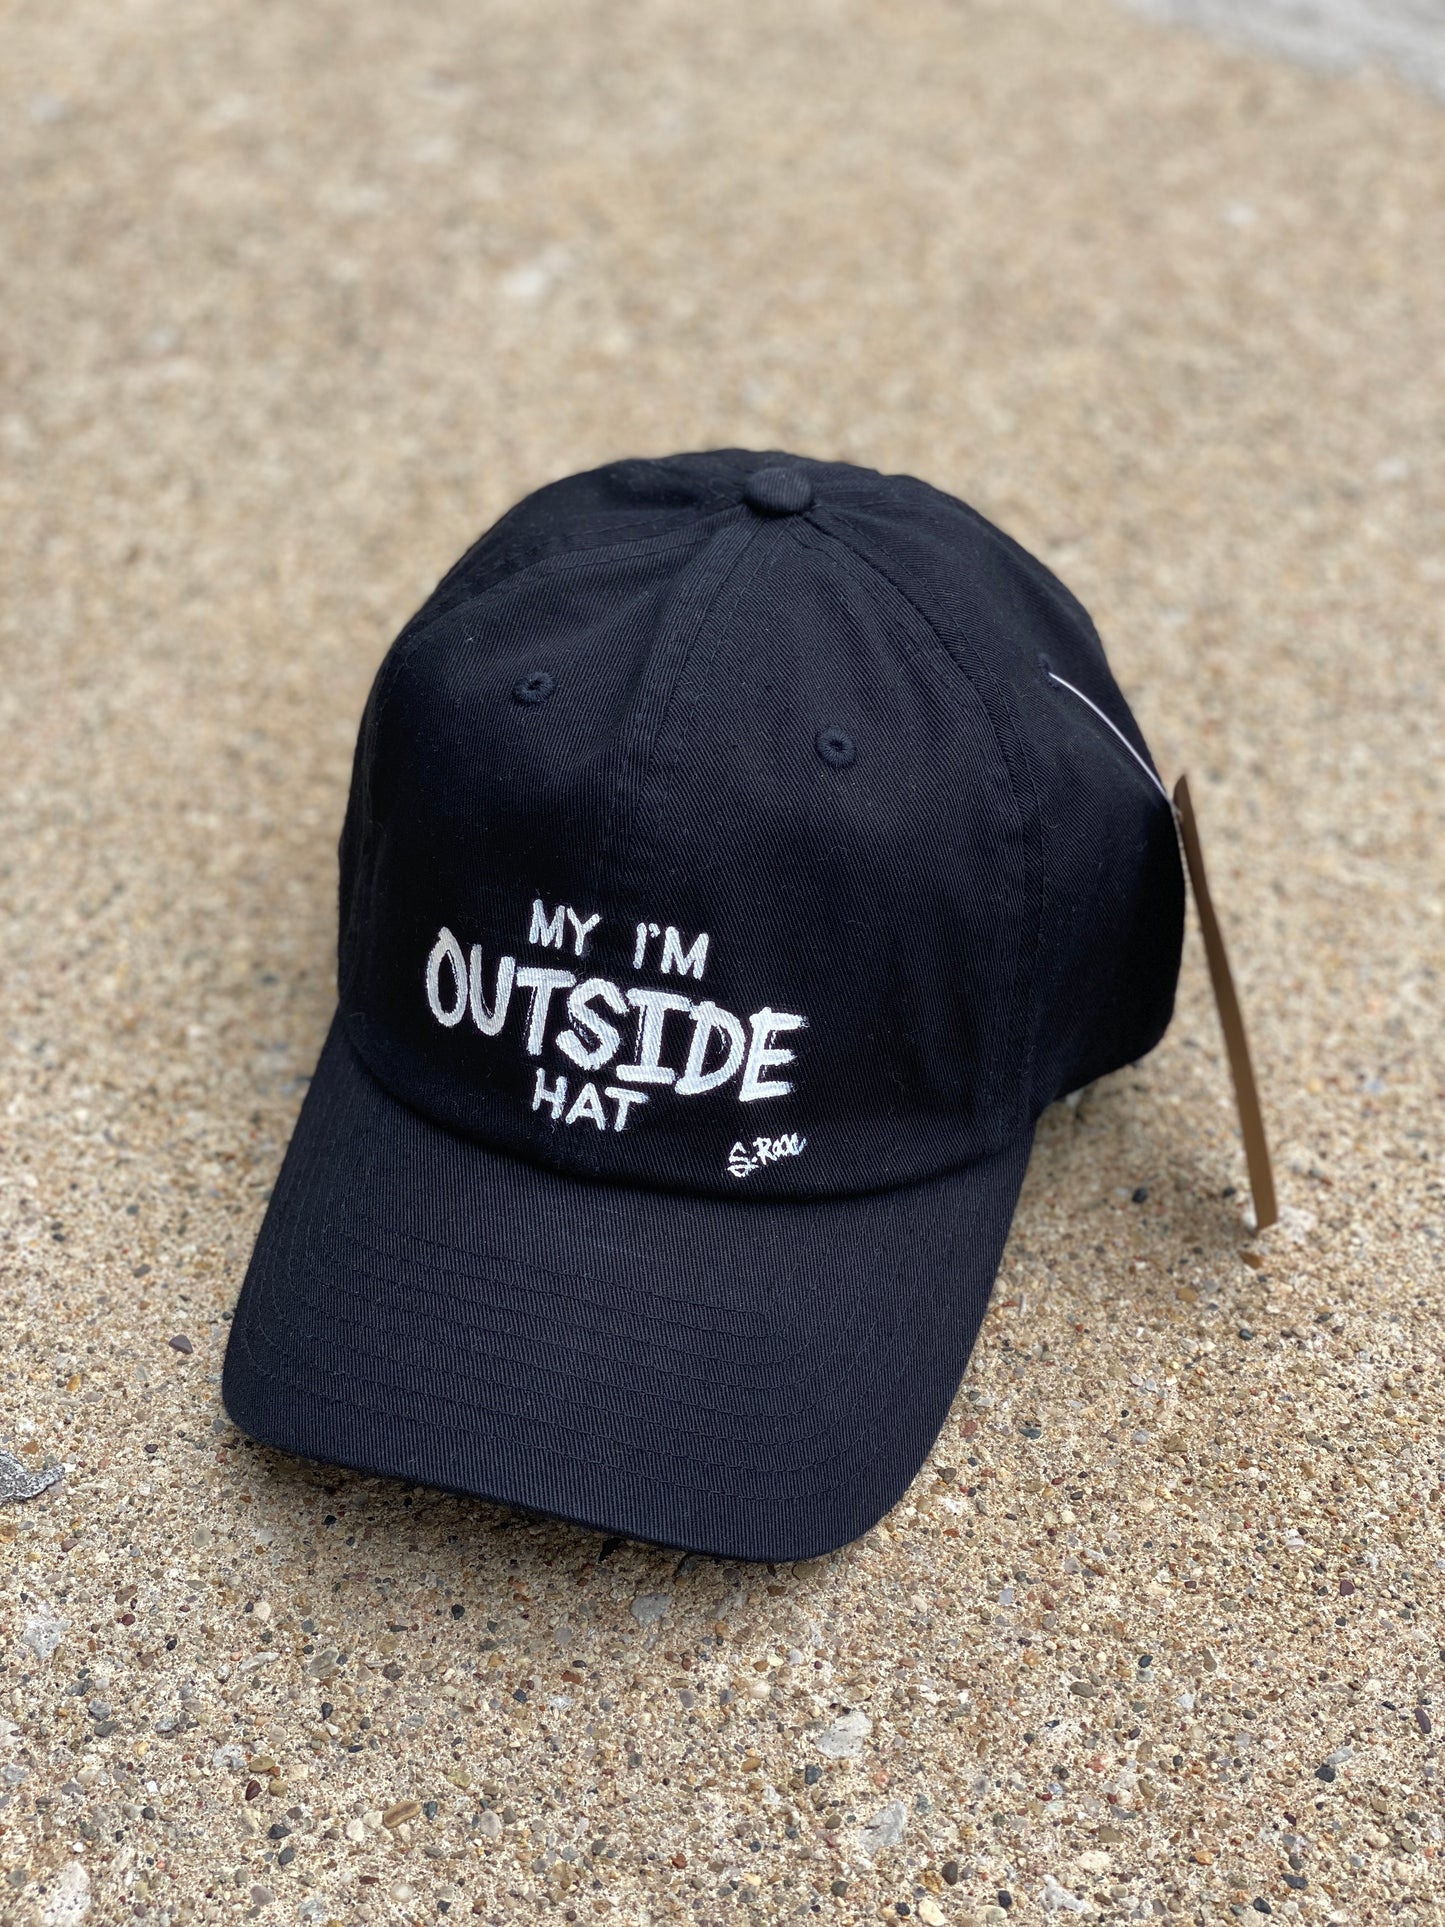 “My I’m Outside Hat” Hand Painted Strap back hat